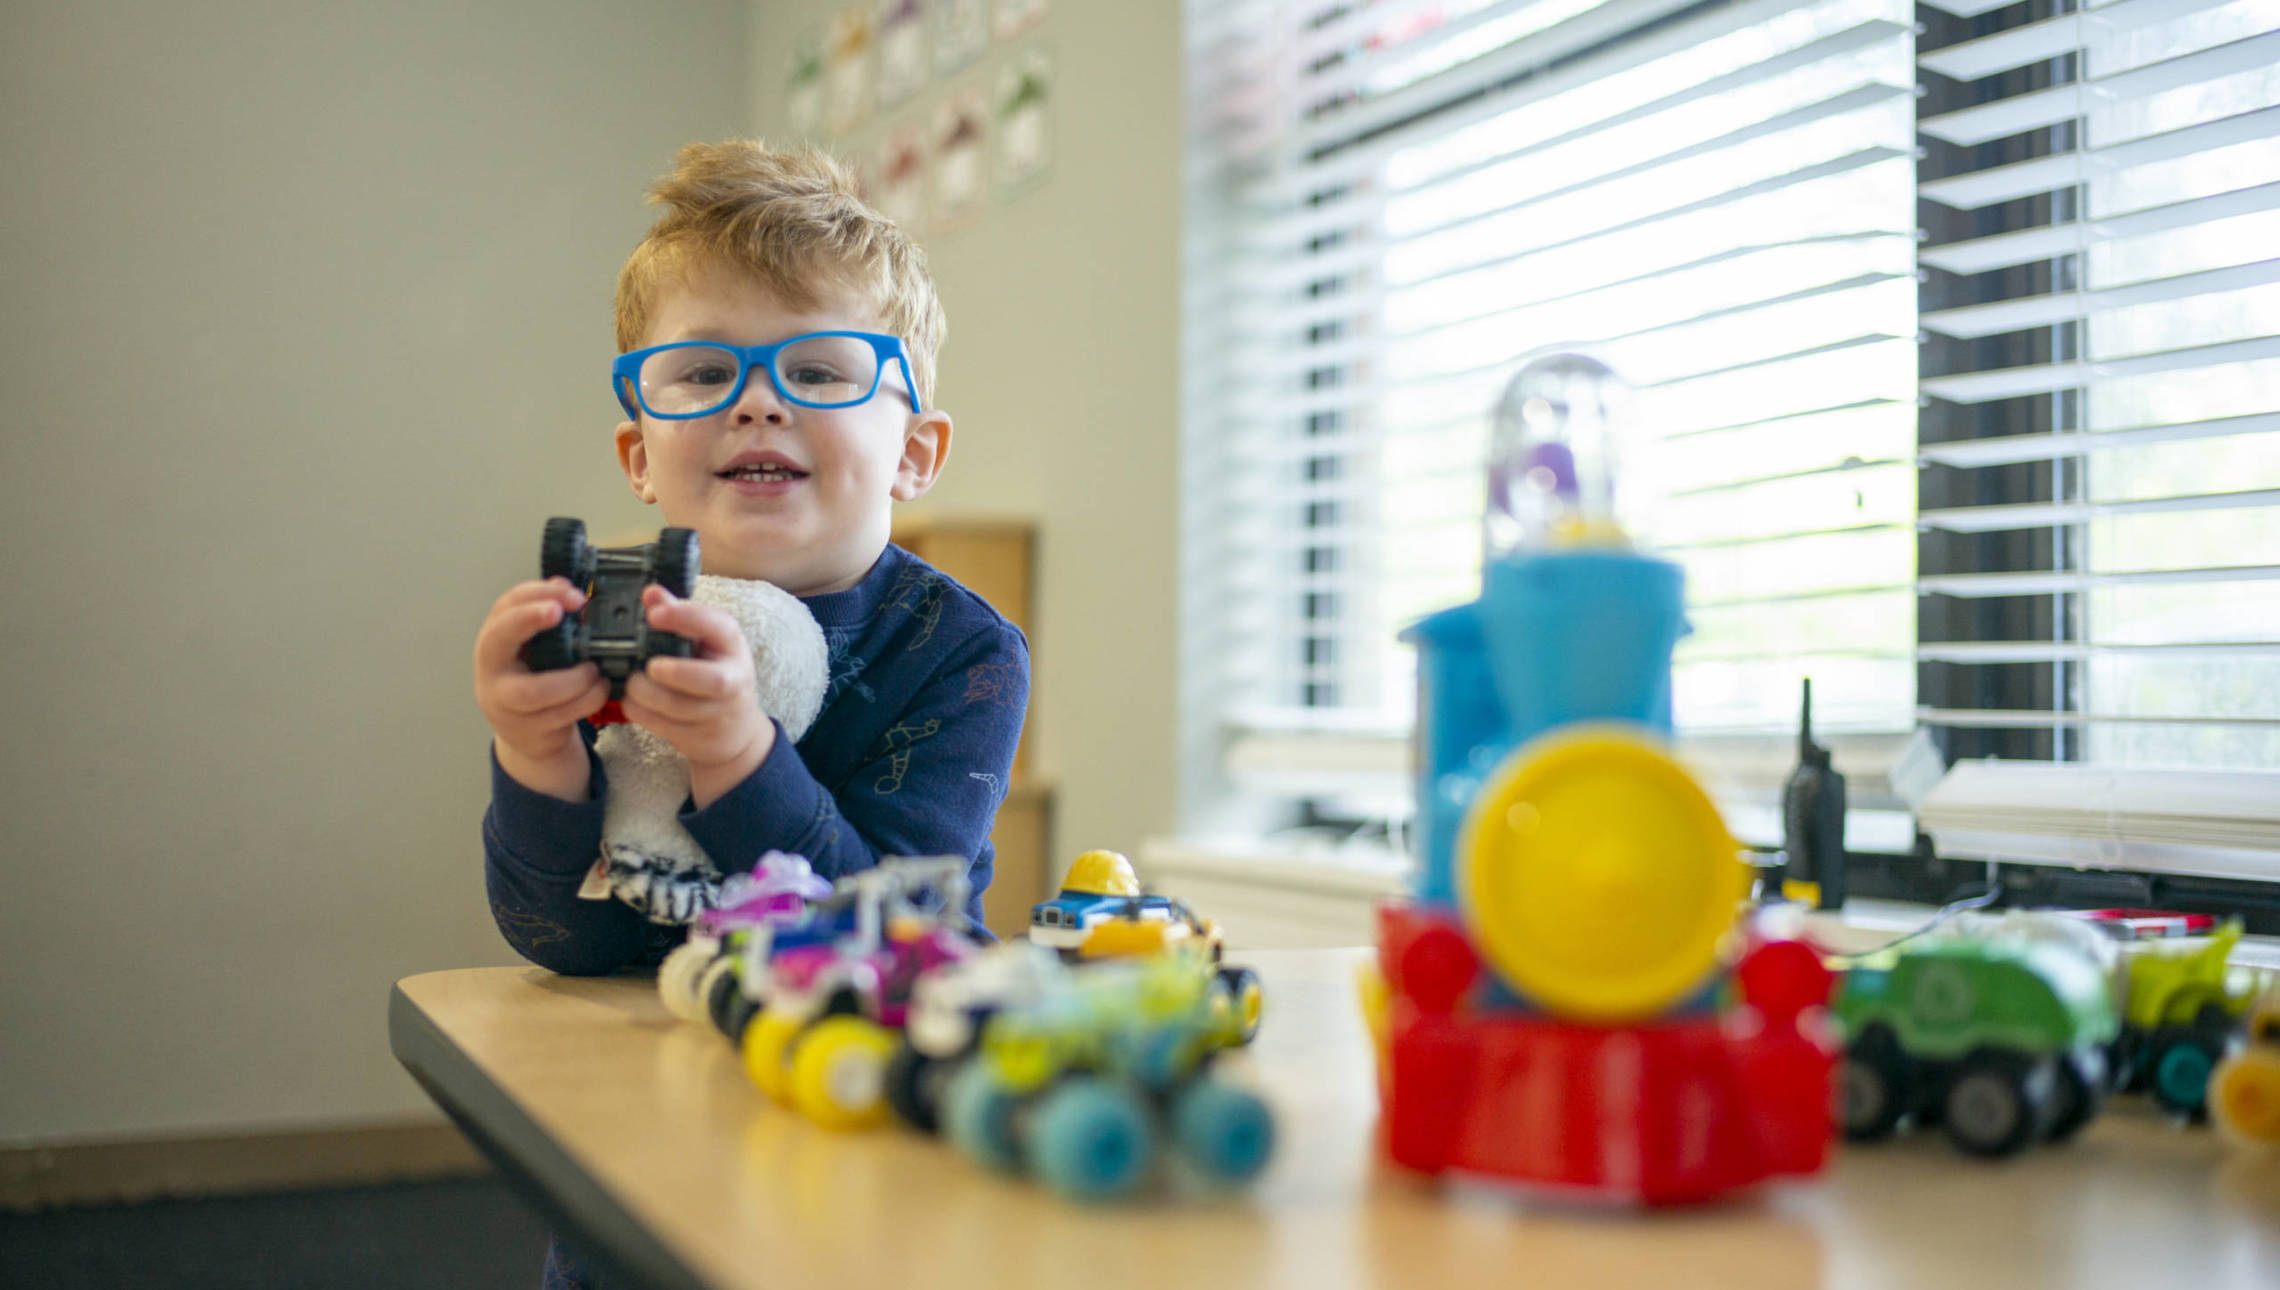 Boy in glasses playing with toys